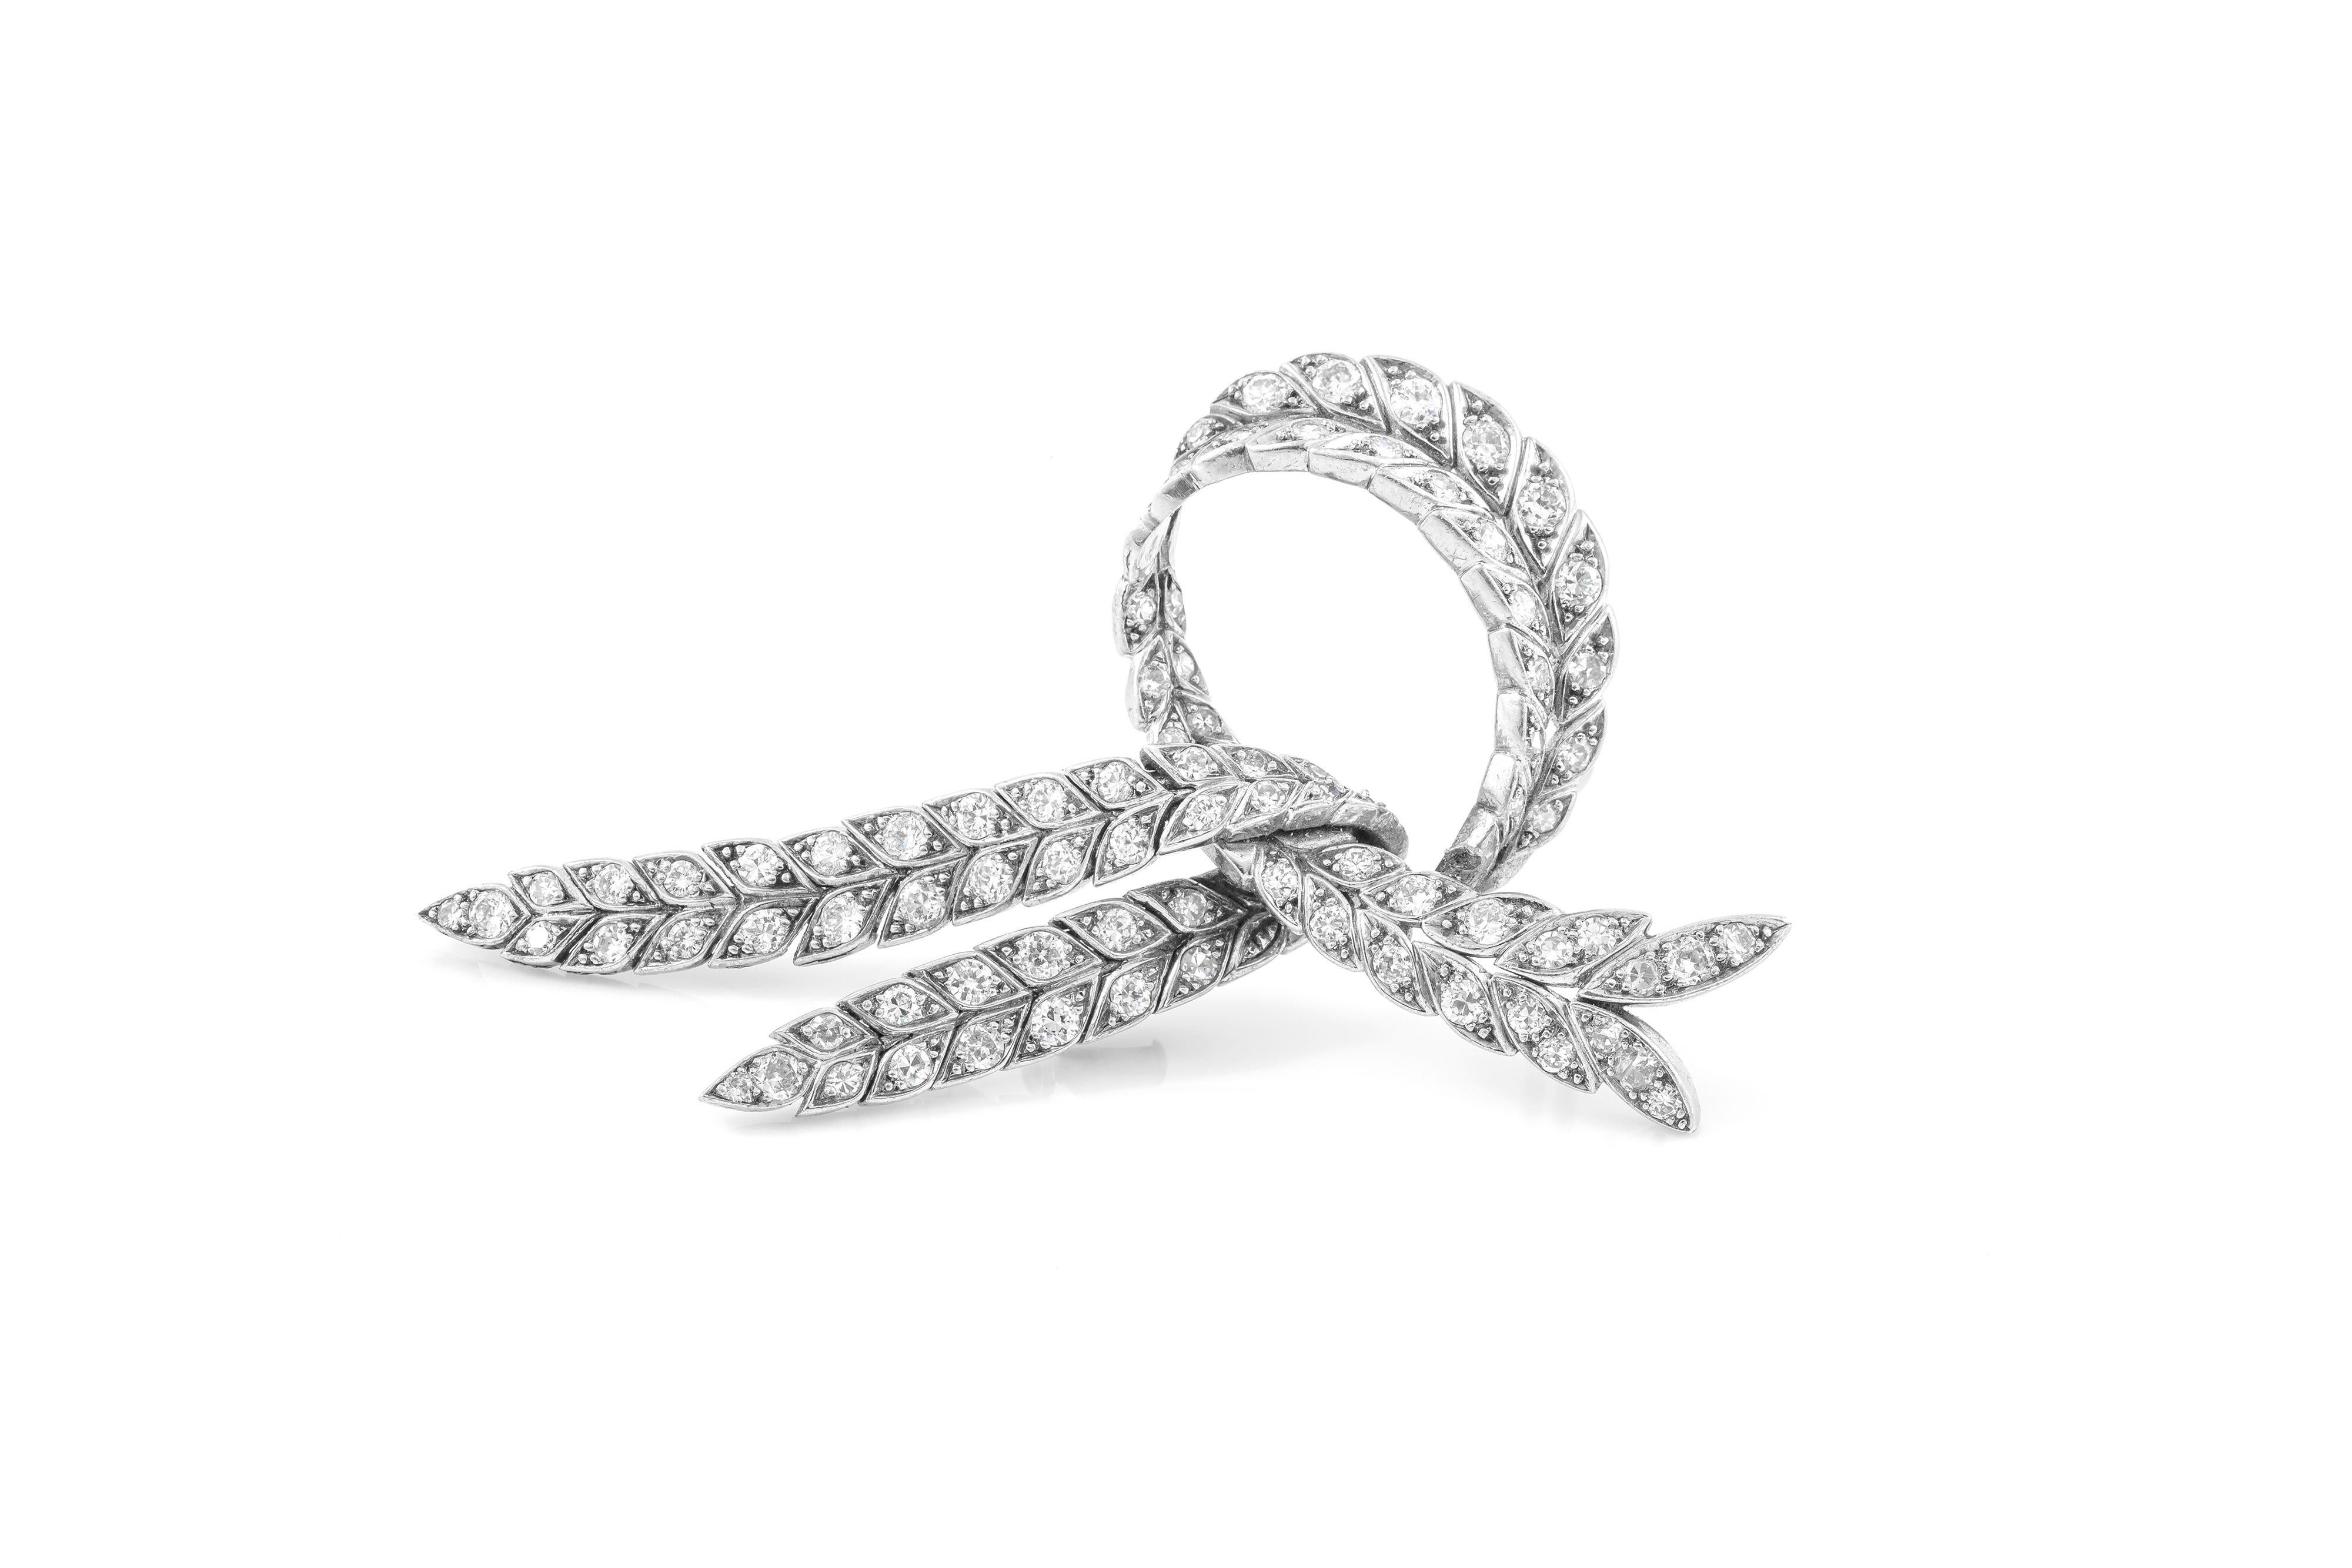 Finely crafted in 18k white gold with round cut diamonds weighing approximately a total of 8.50 carats.
Signed by Sterle